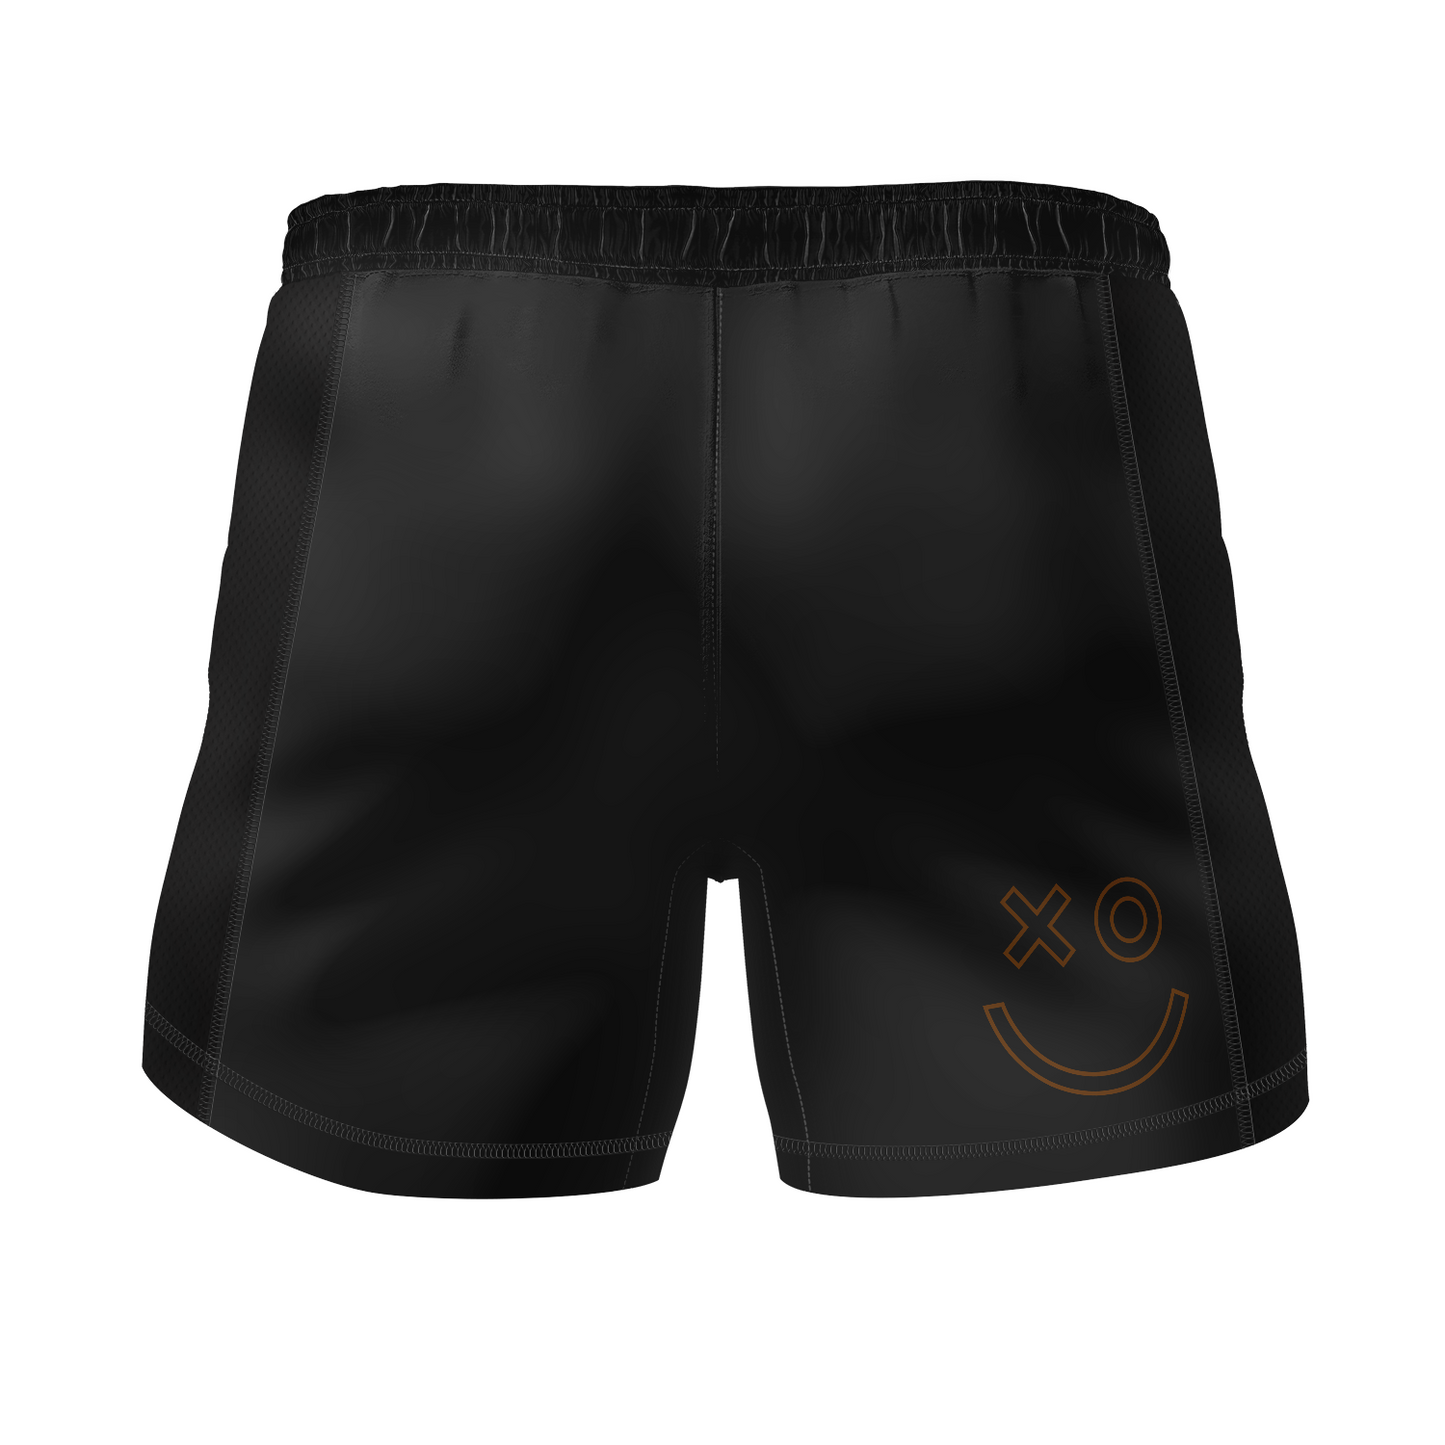 AJJ men's fight shorts The Staple, black and brown